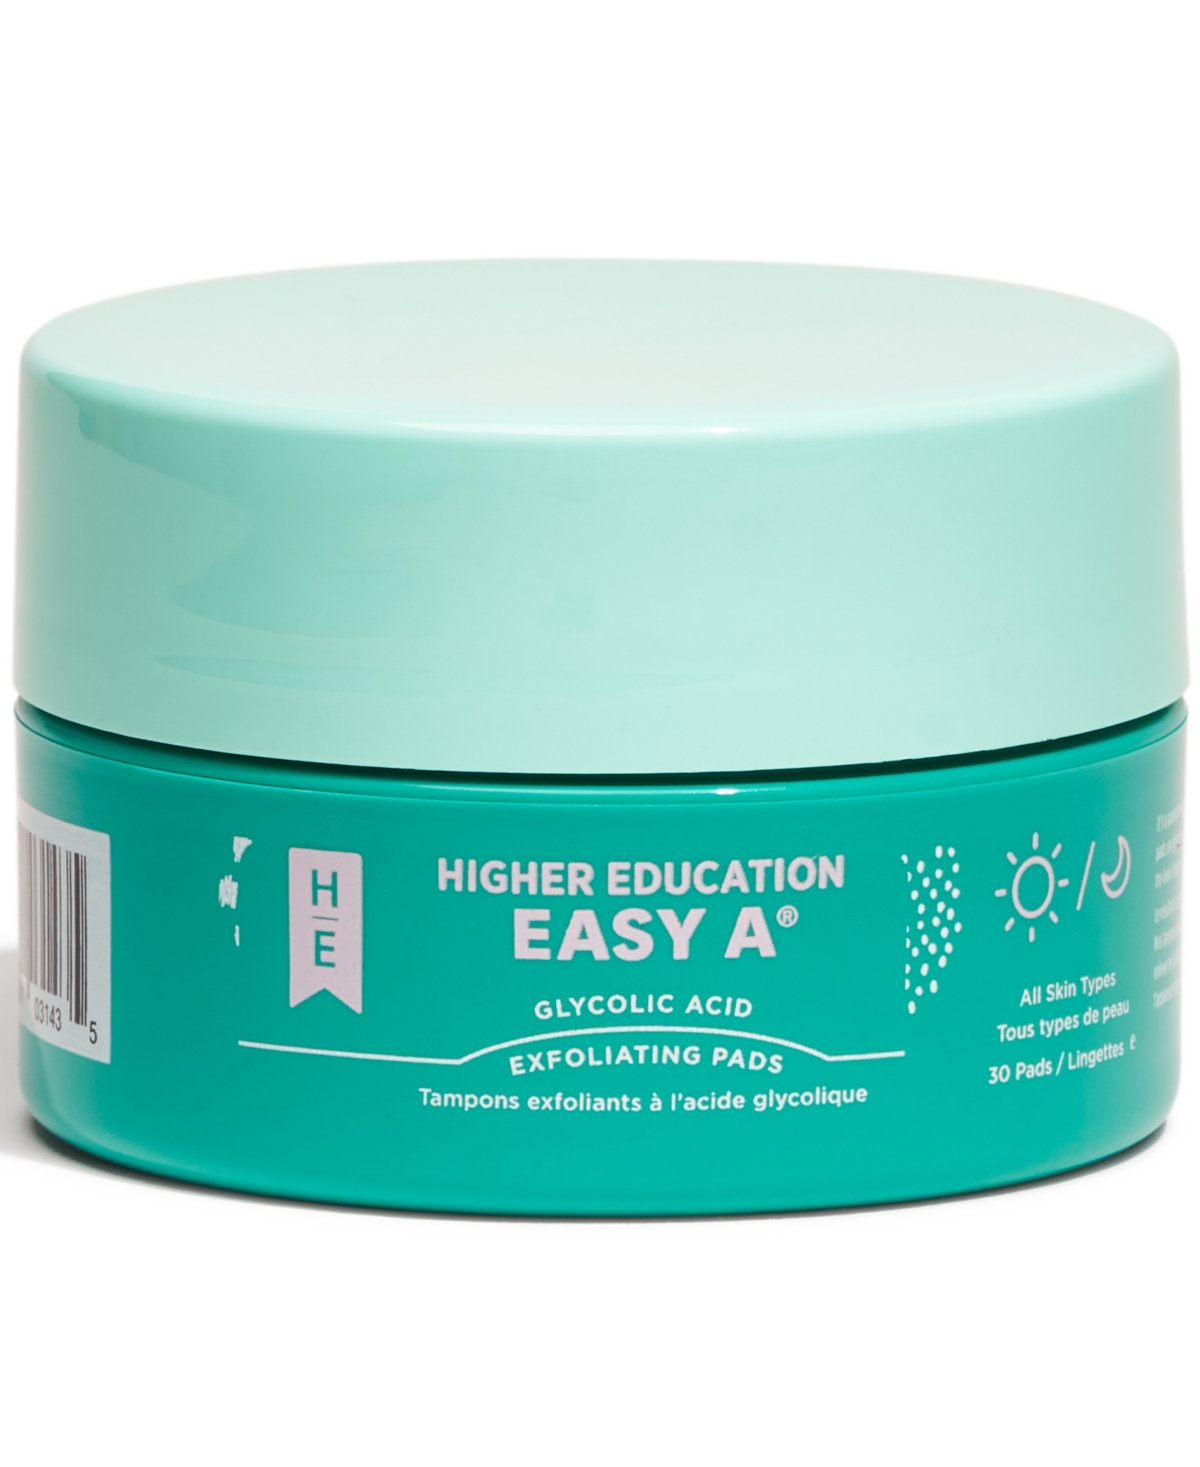 Easy A Glycolic Acid Pads Travel Size, 30 Pads